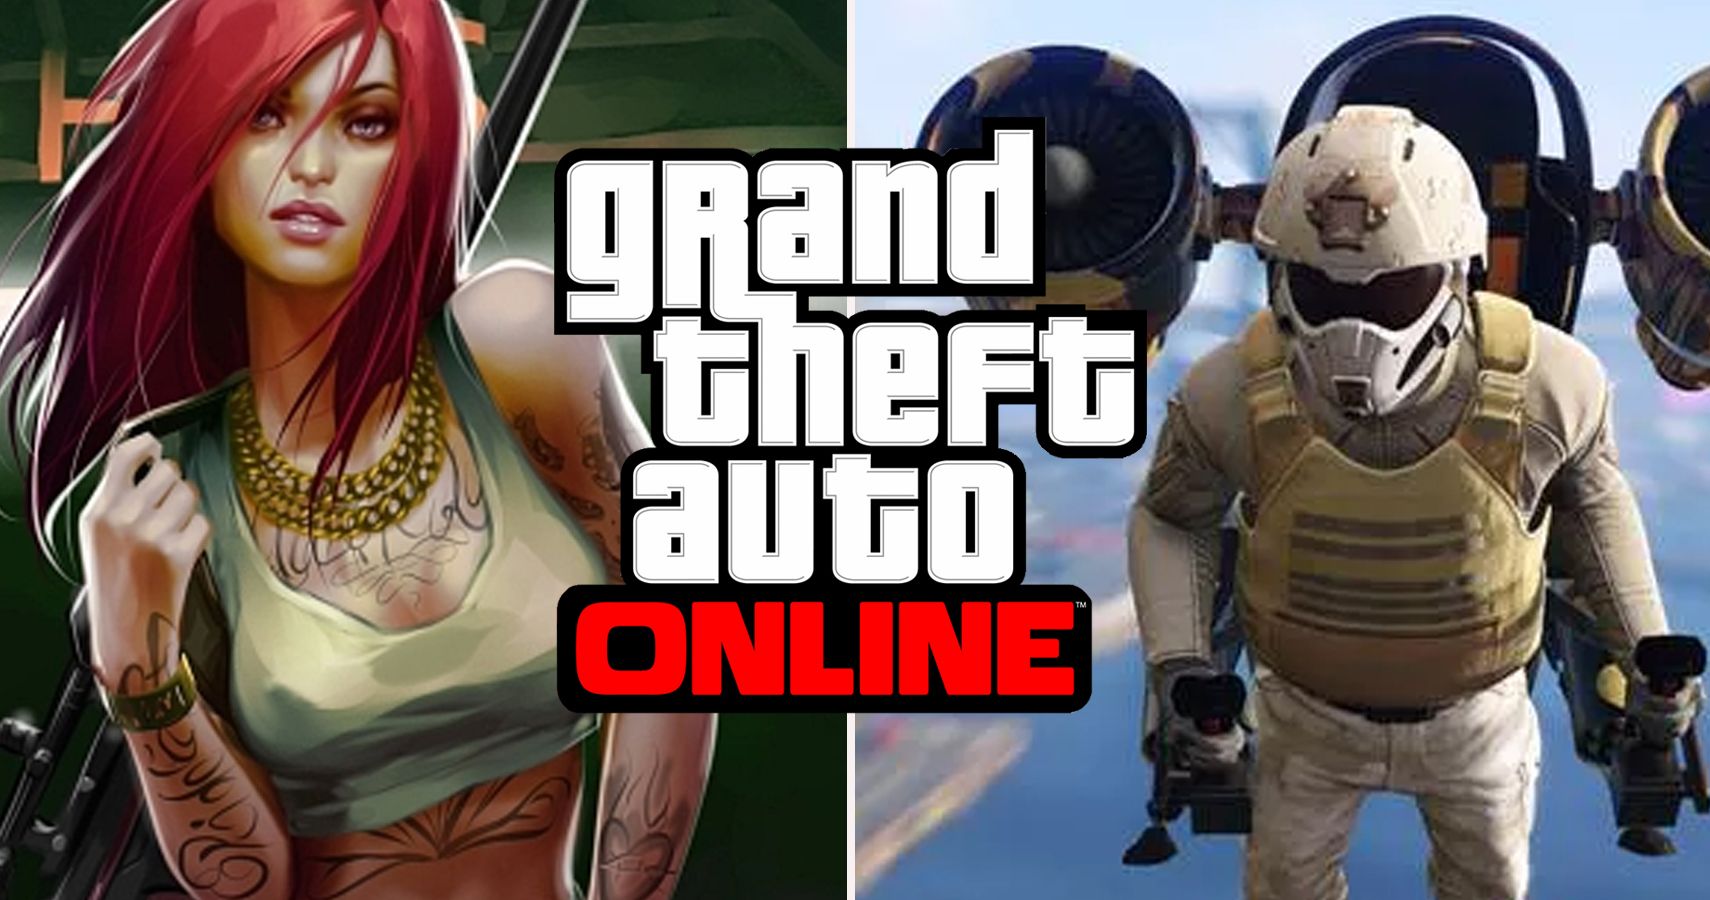 GTA Online Kicked Ass in December, With the Highest Player Count Ever